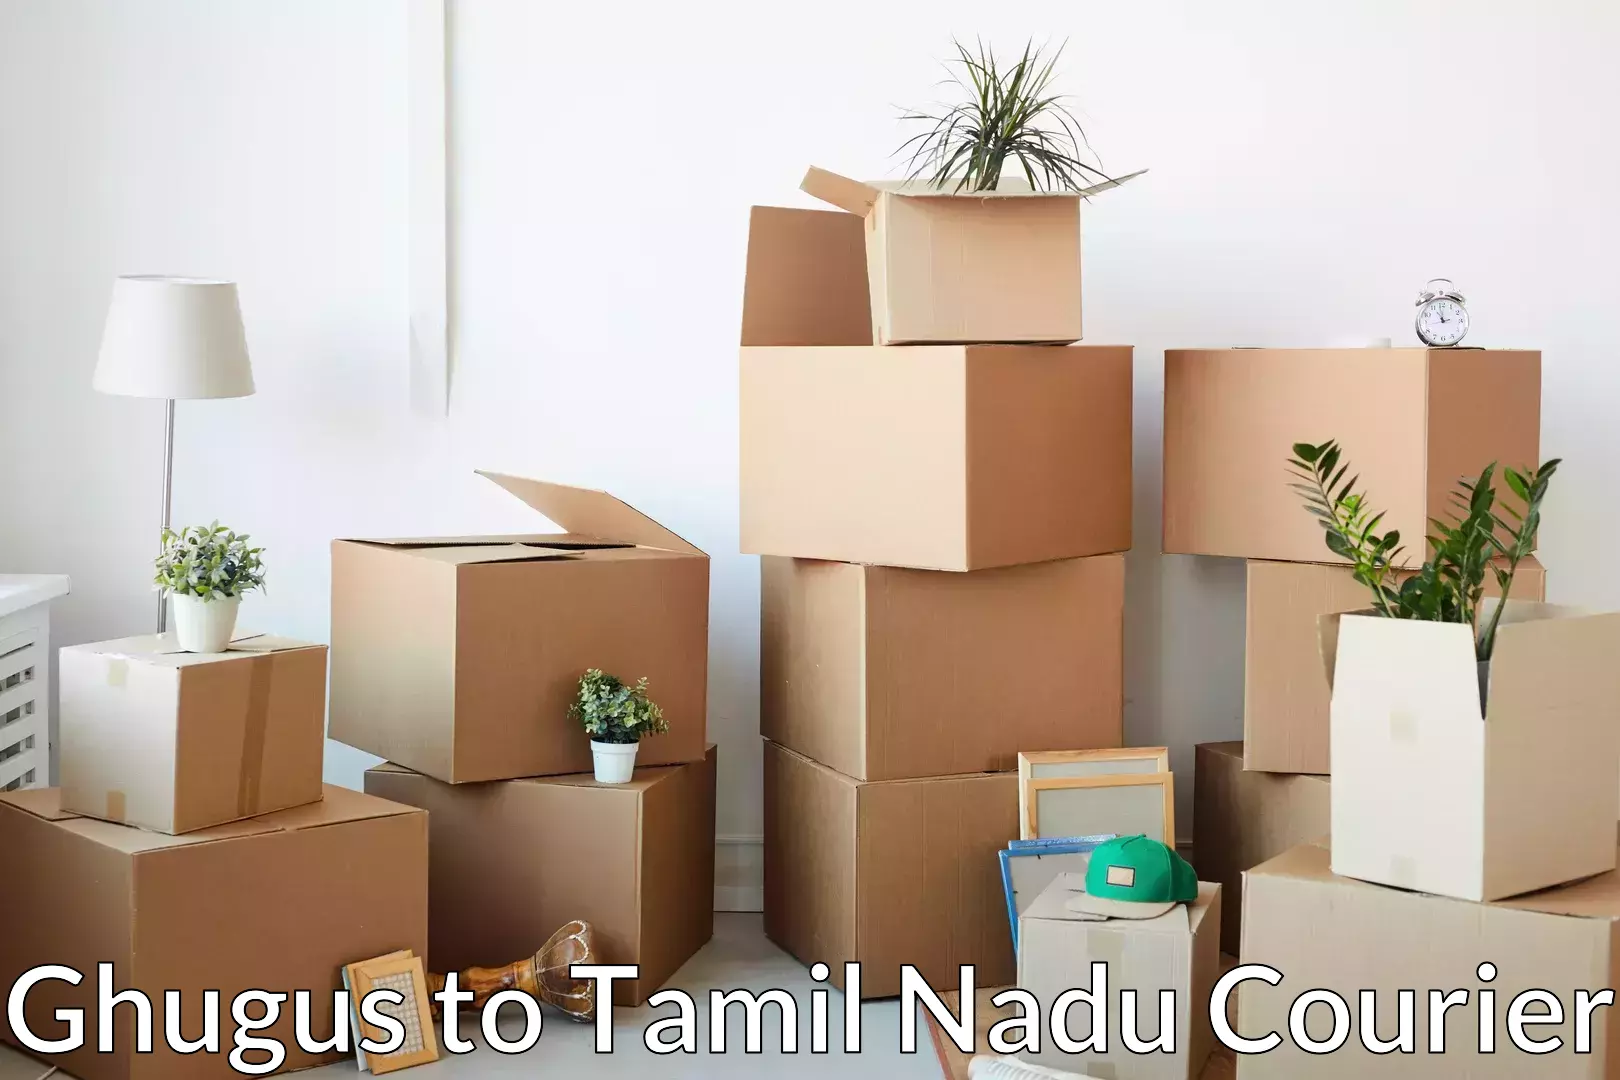 Trusted moving company Ghugus to Tamil Nadu